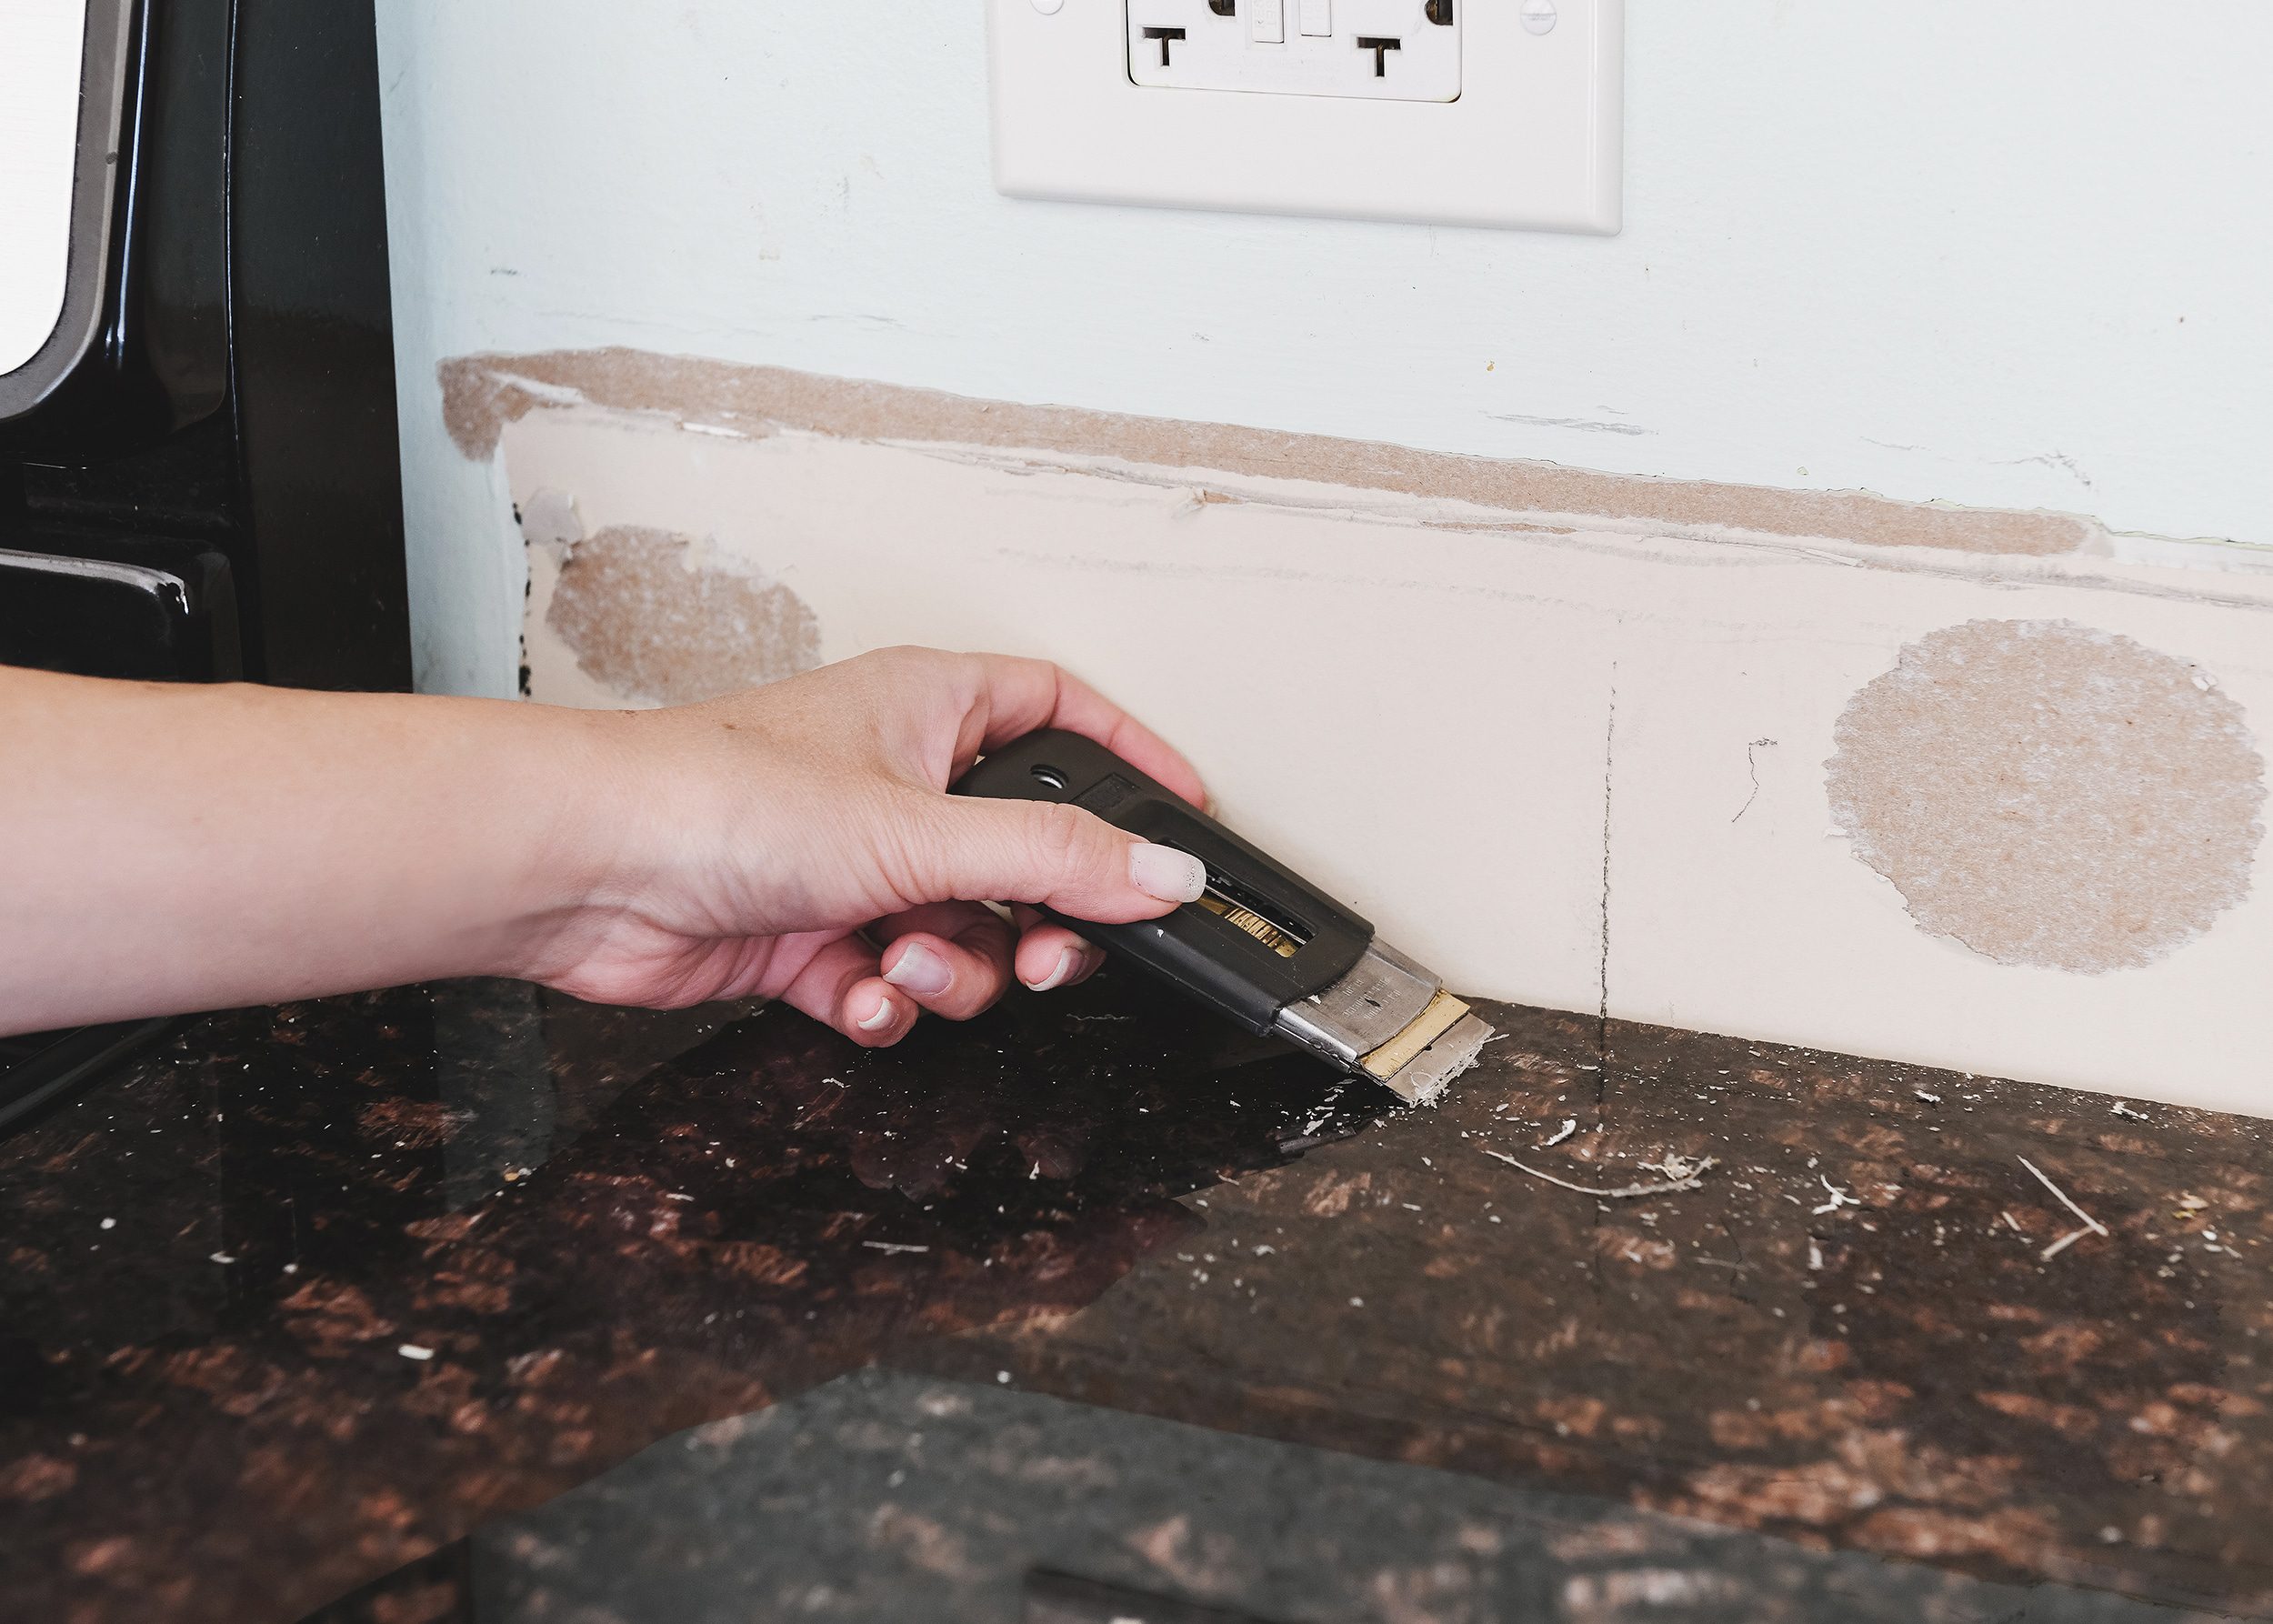 Kim uses a razor blade in a retractable handle to remove excess caulk from the countertop surface. 